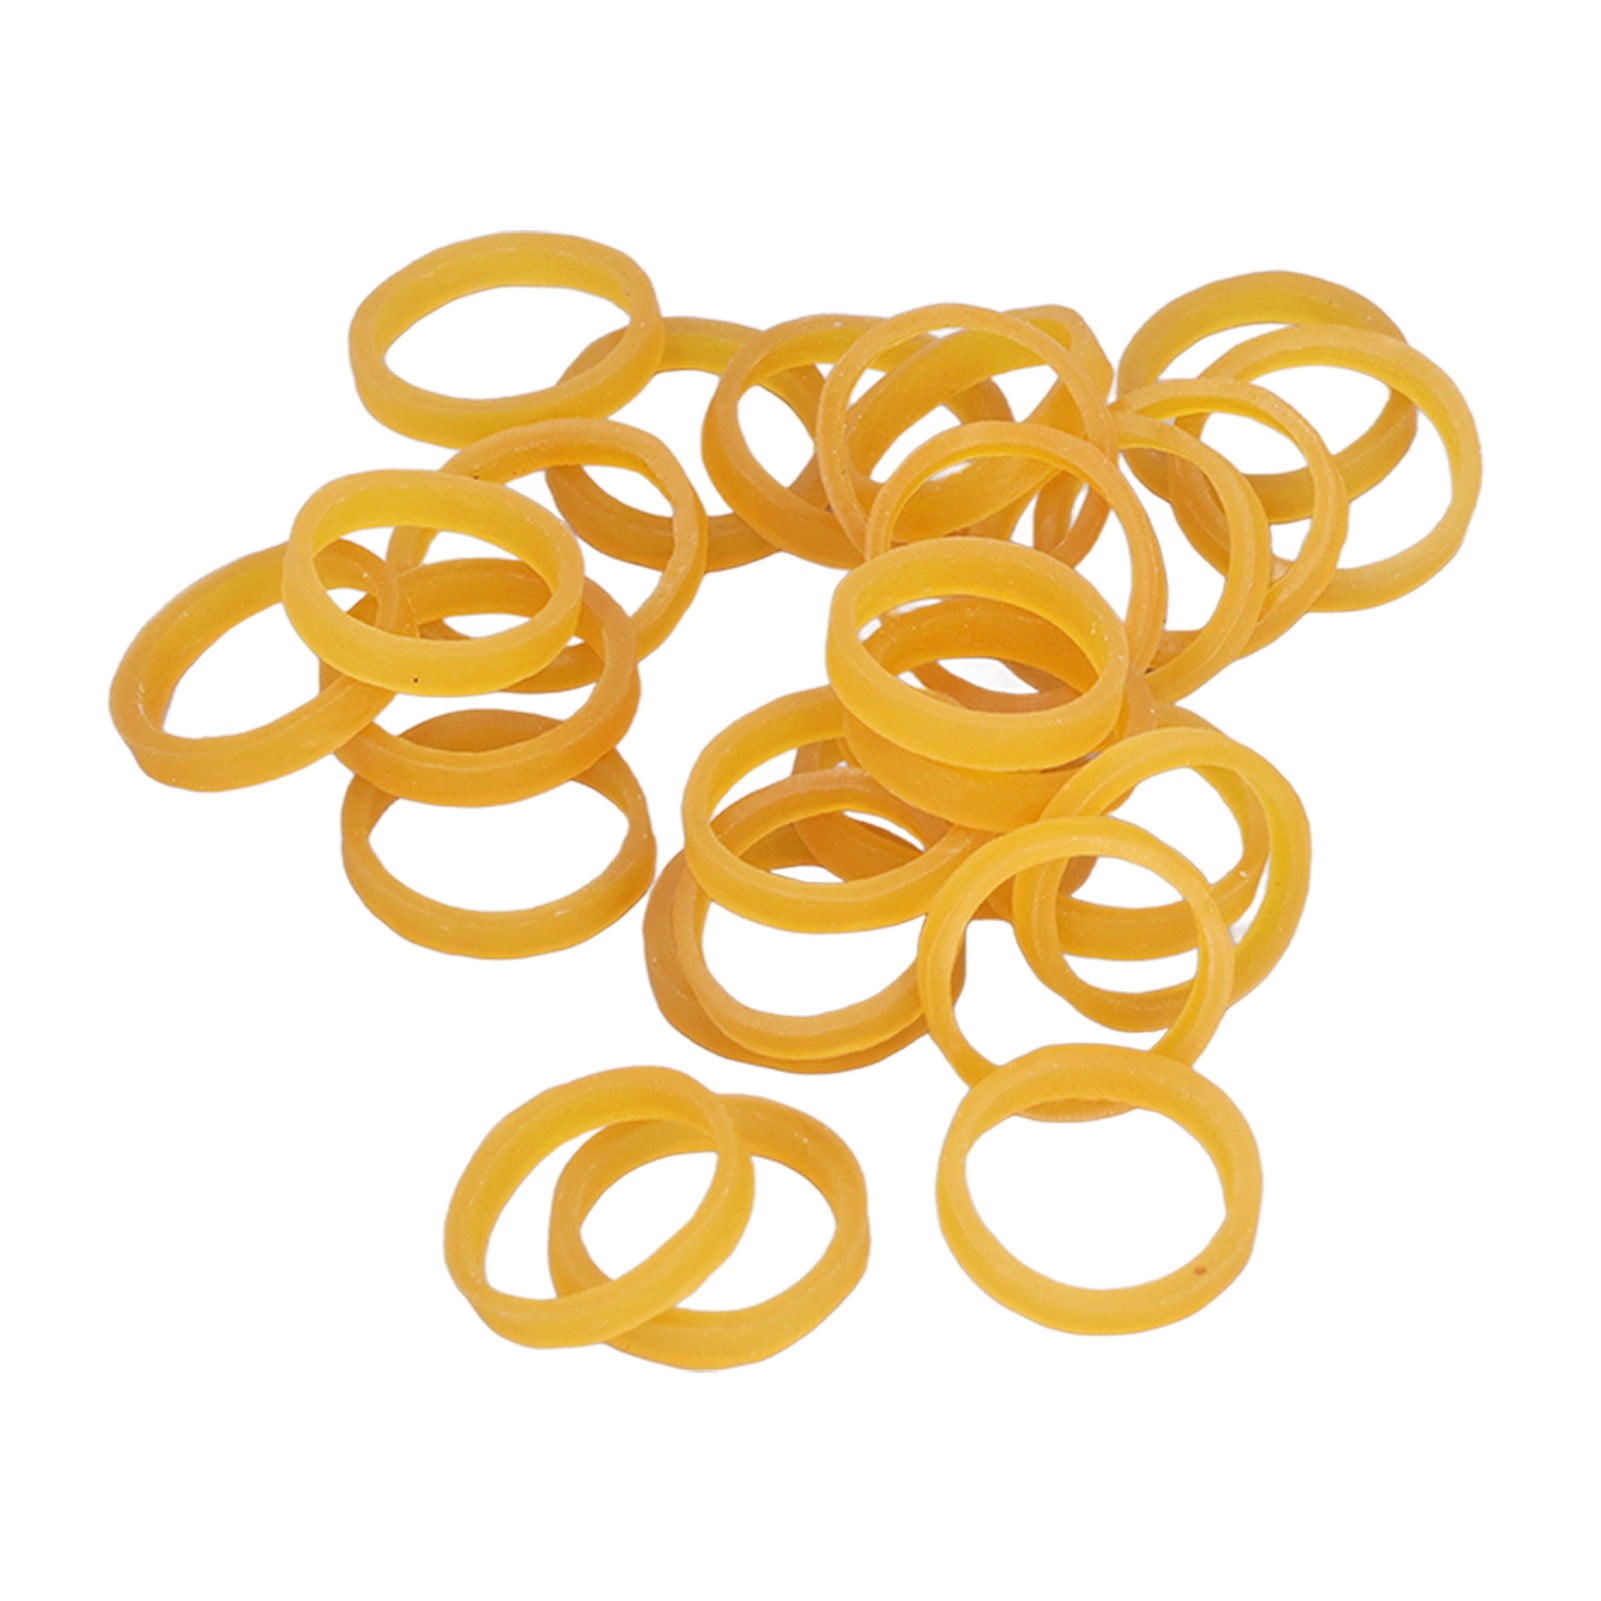 50-200Pcs High Quality White Rubber Elastic Bands Stretchable Sturdy Rubber  Rings Diameter 15mm-60mm